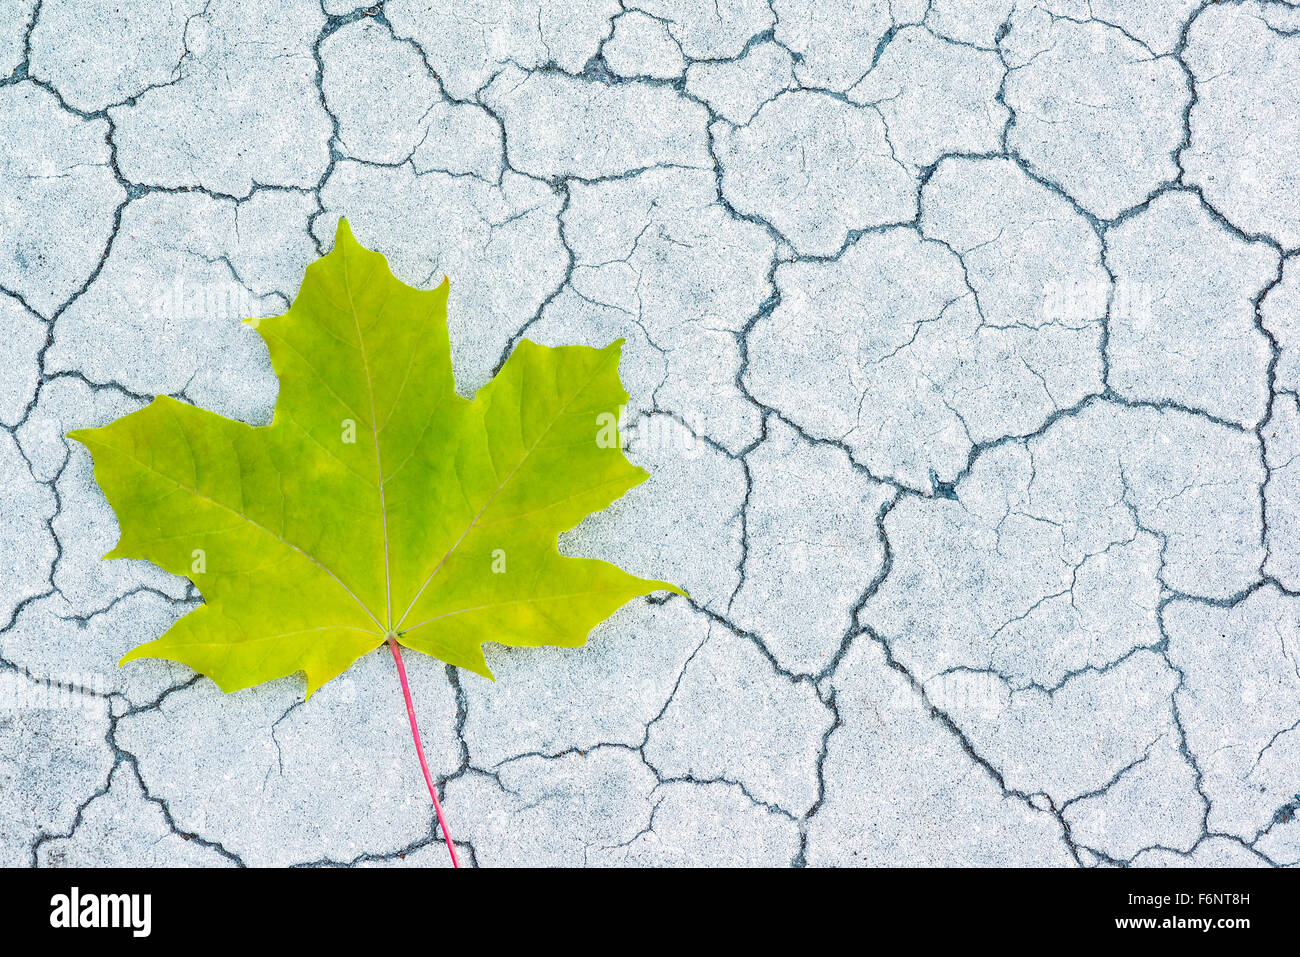 Light green maple leaf on cracked surface Stock Photo